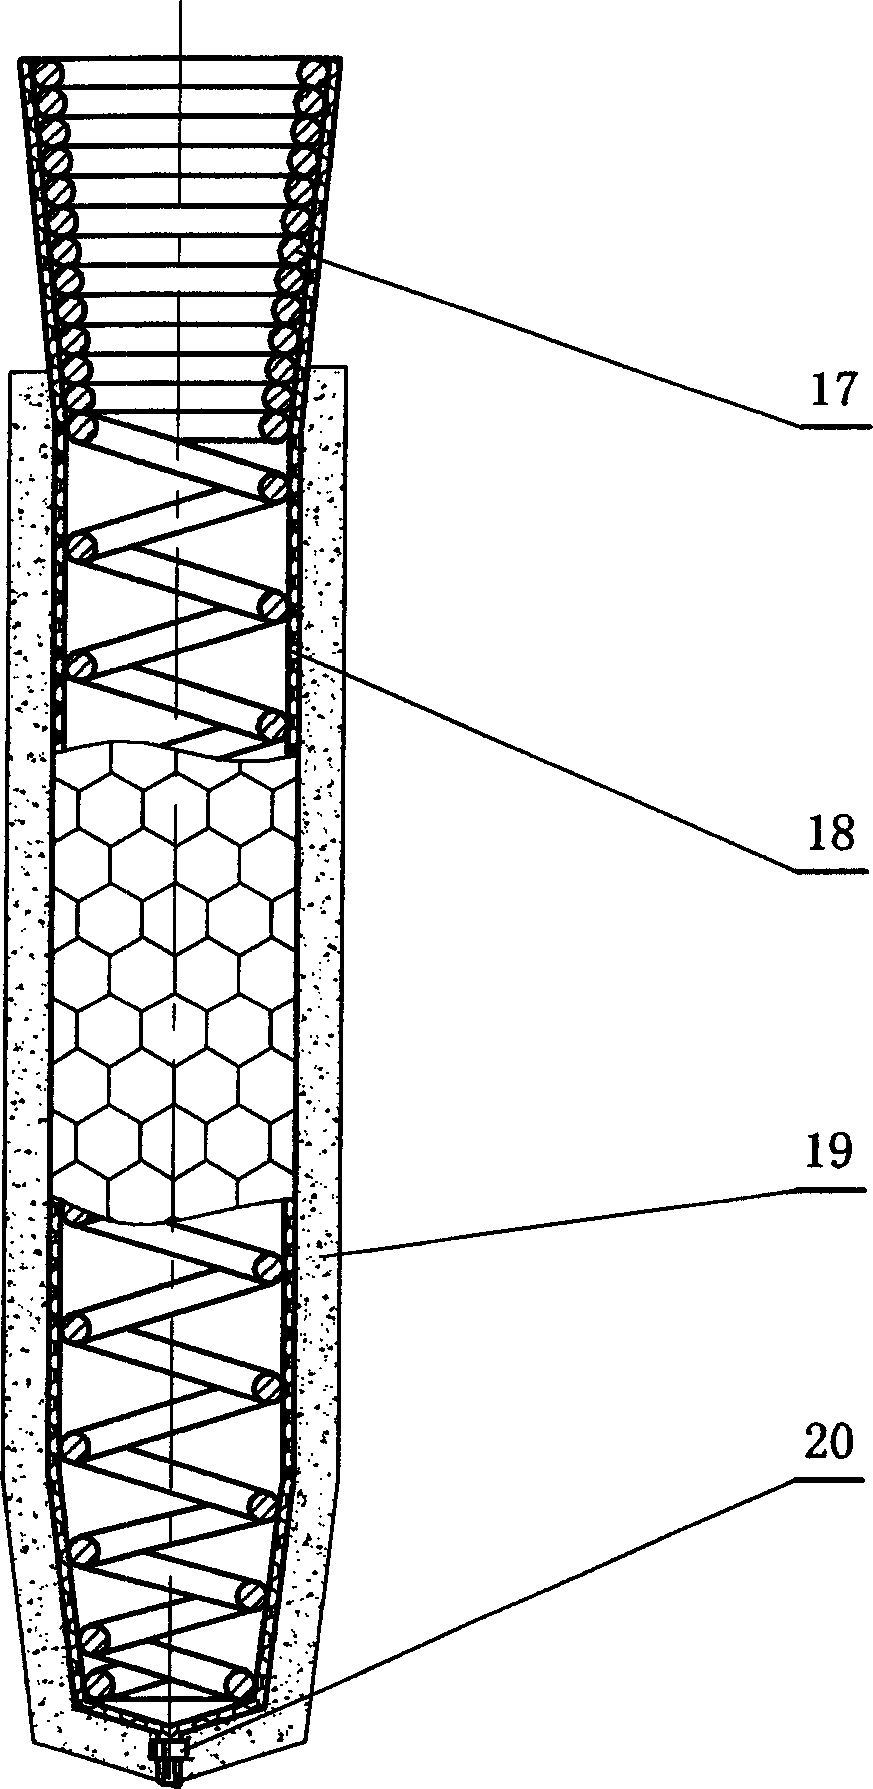 High oxidizing filtering system